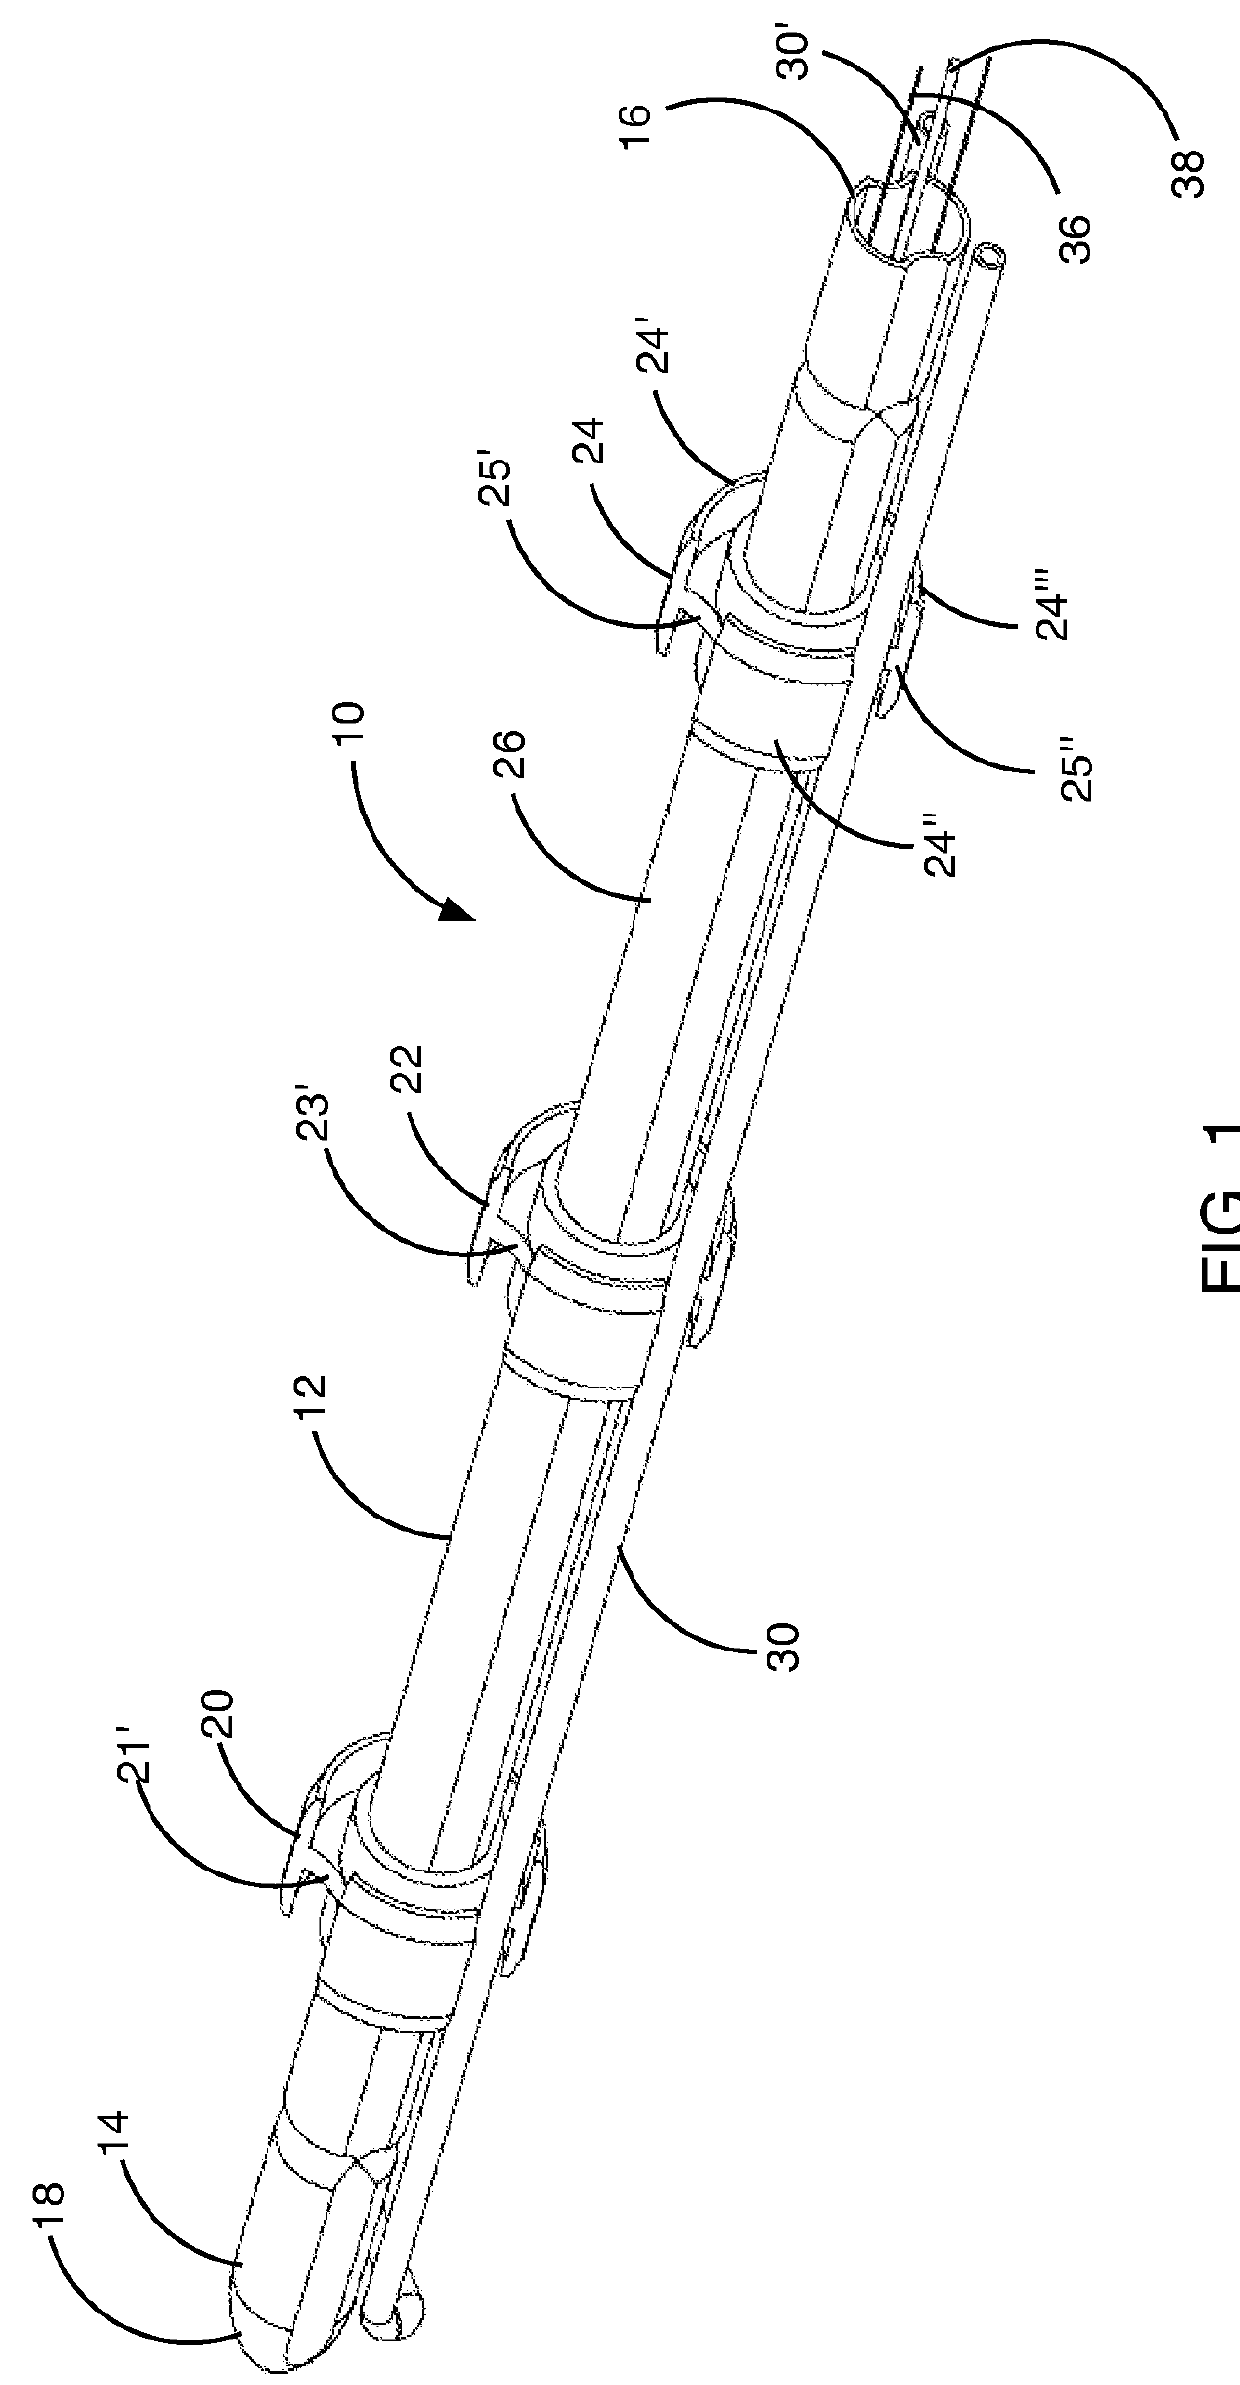 Hot hole charge system and related methods